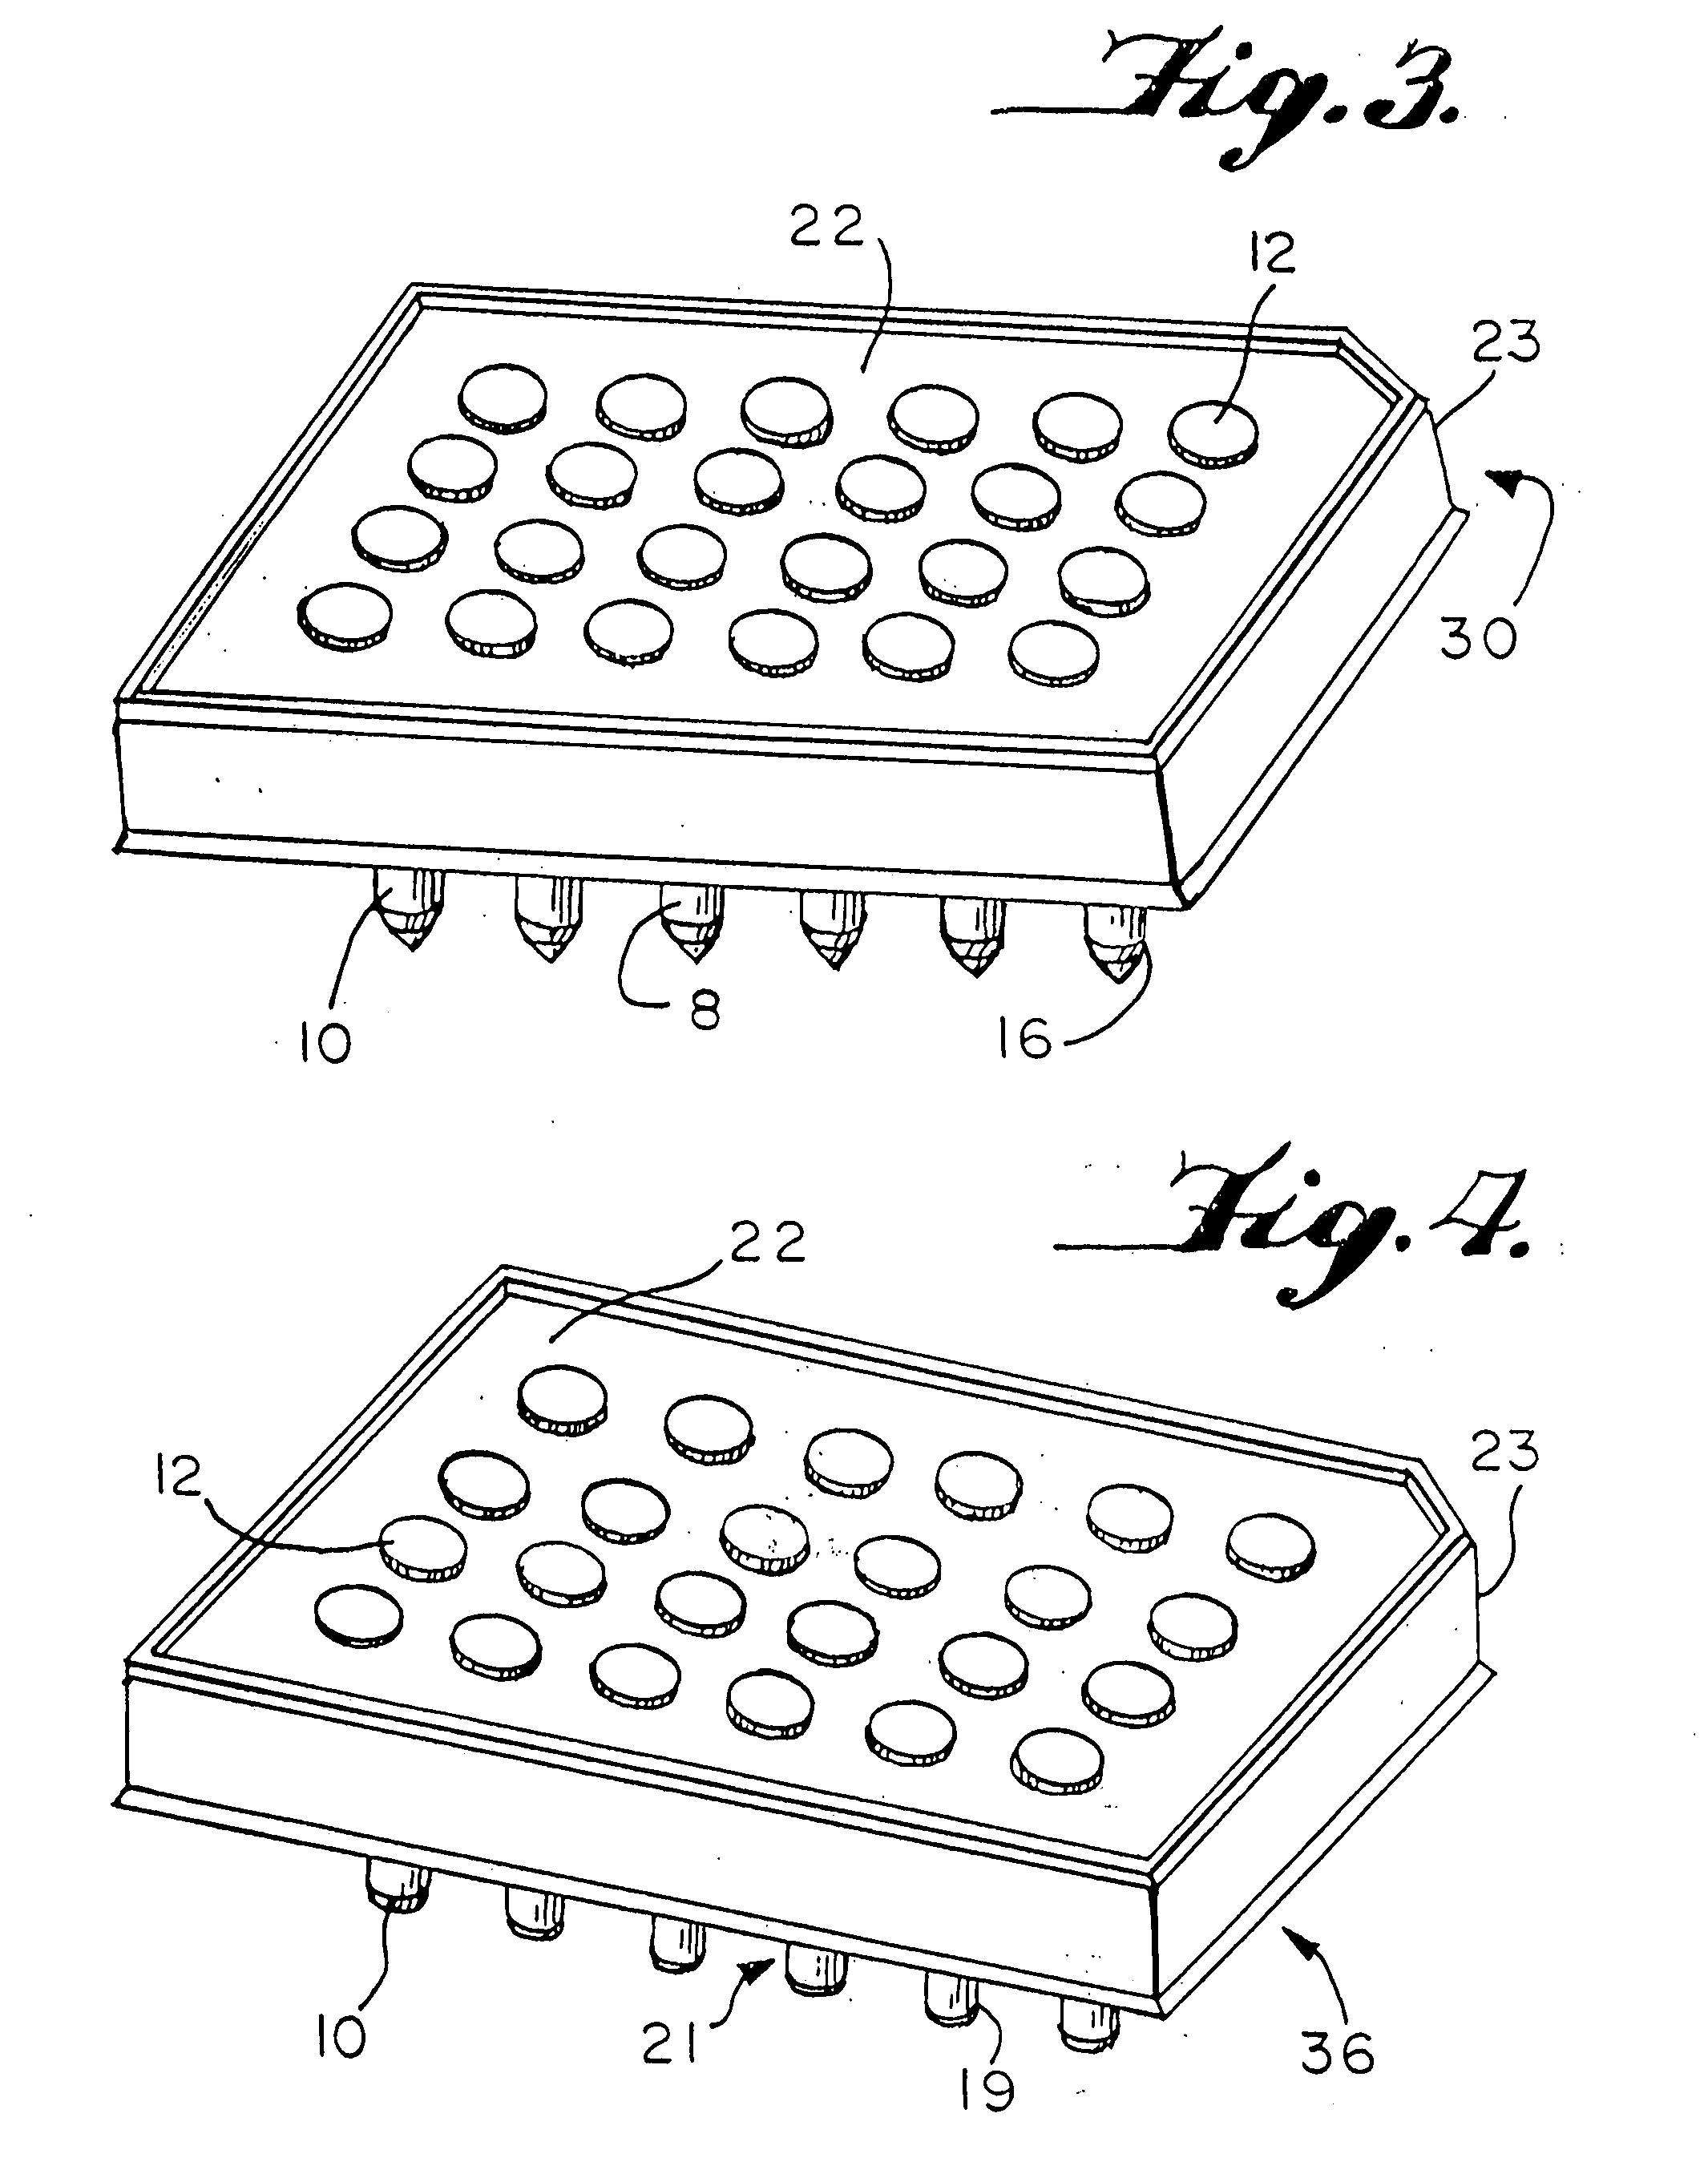 Capsule and tray systems for combined sample collection, archiving, purification, and PCR